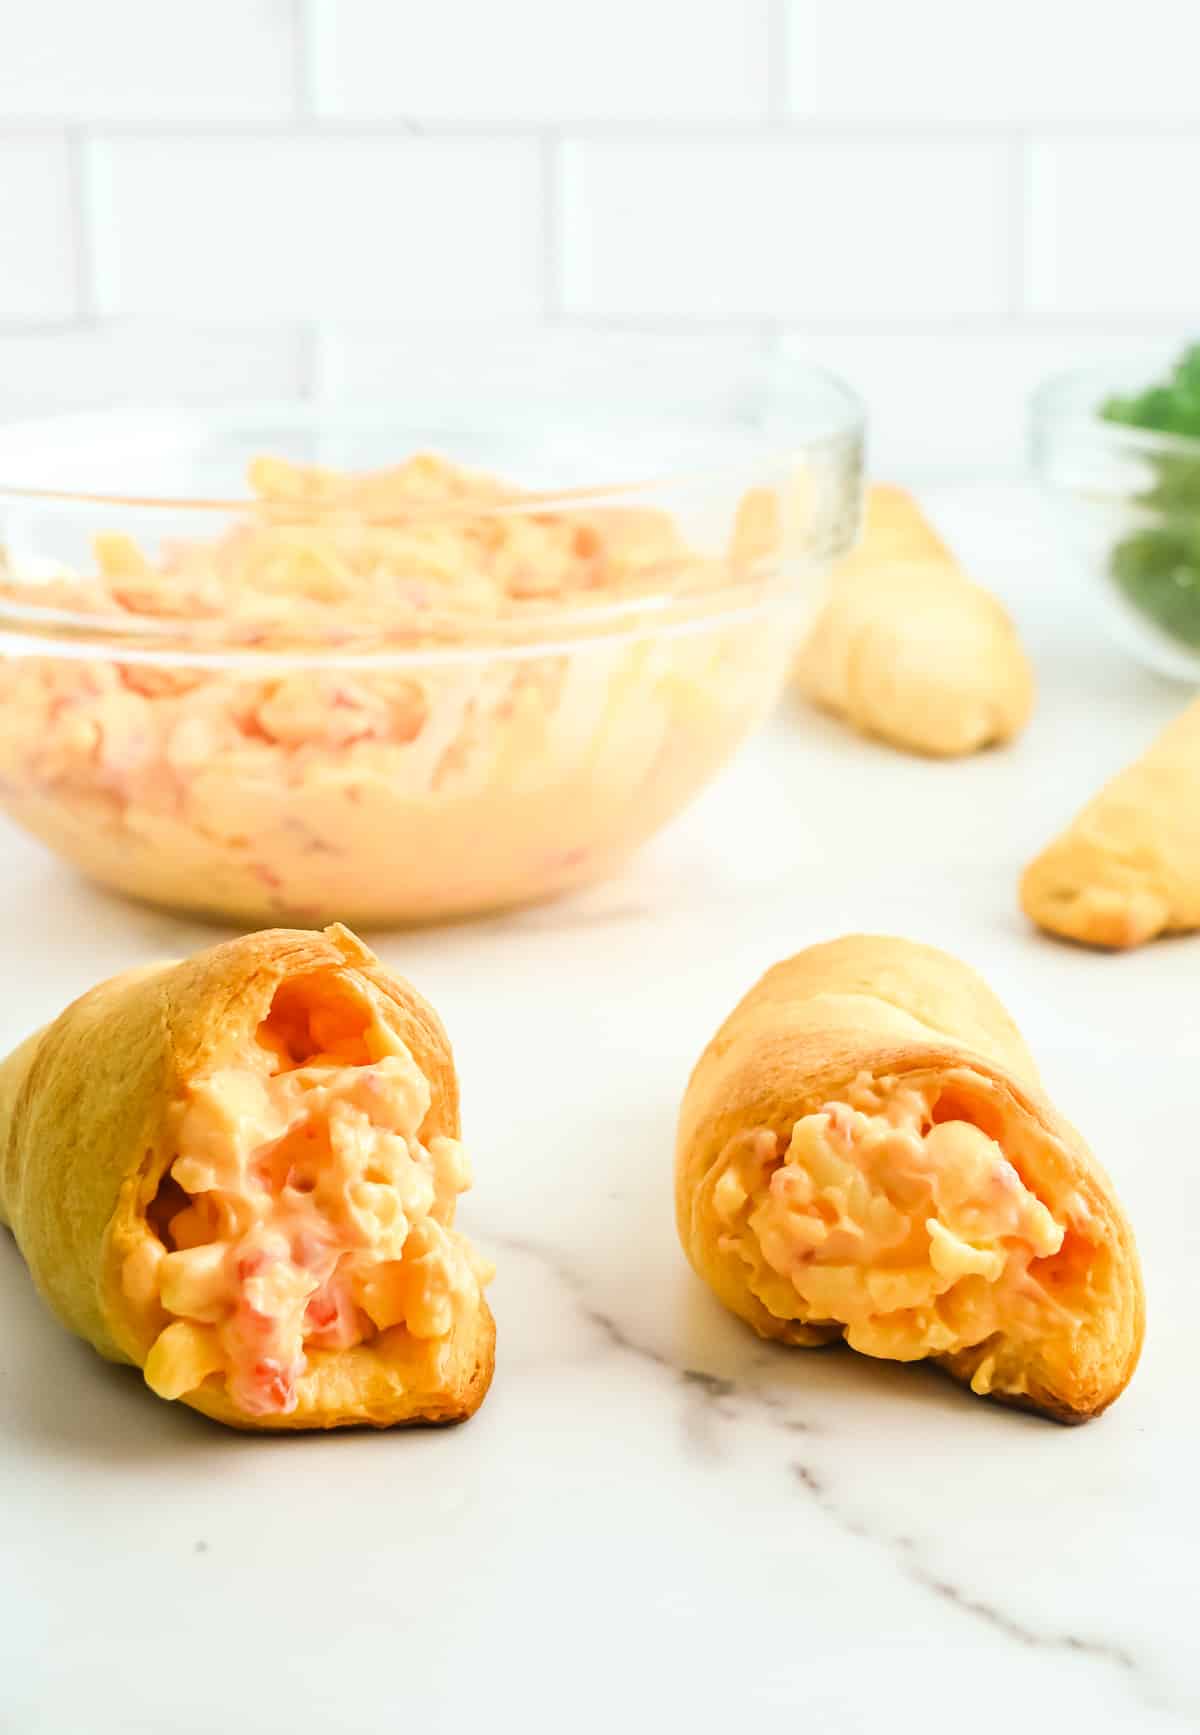 Crescent roll carrots from the end being stuffed with pimento cheese with a bowl of pimento cheese in the background.